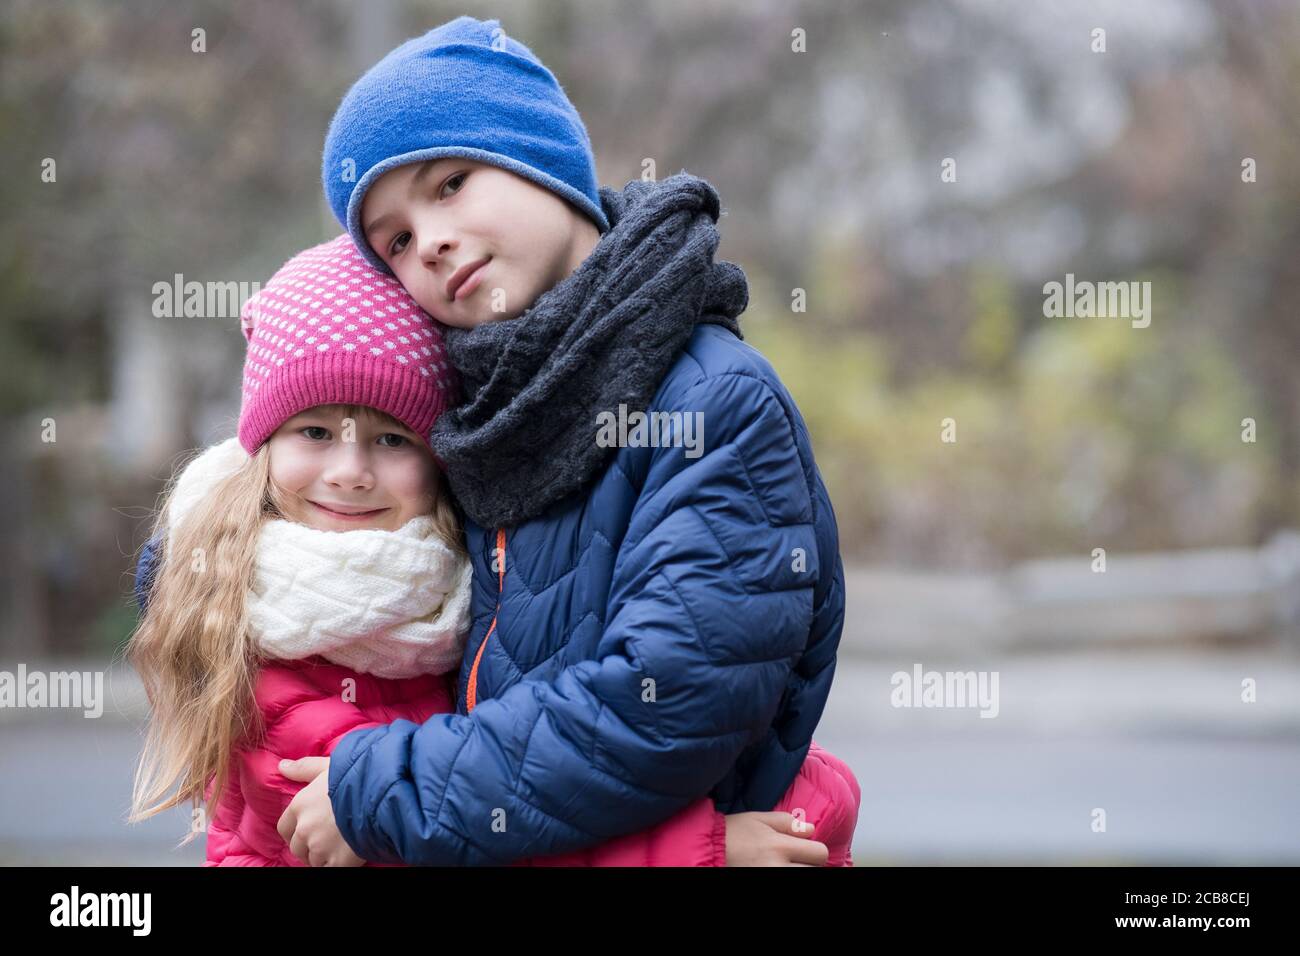 Two children boy and girl hugging each other outdoors wearing warm clothes in cold autumn or winter weather. Stock Photo